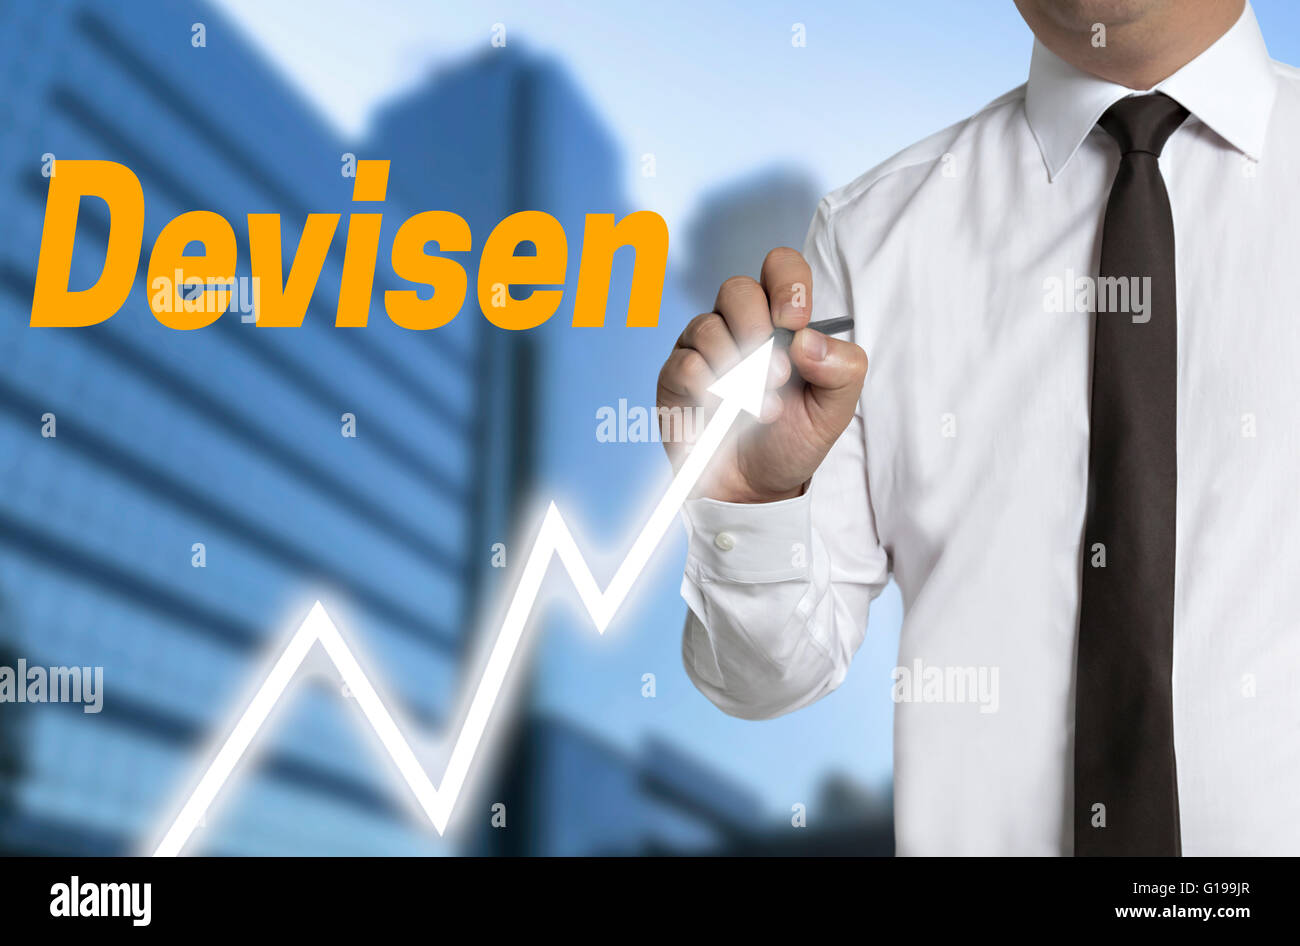 devisen (in german currency) trader draws market price on touchscreen. Stock Photo